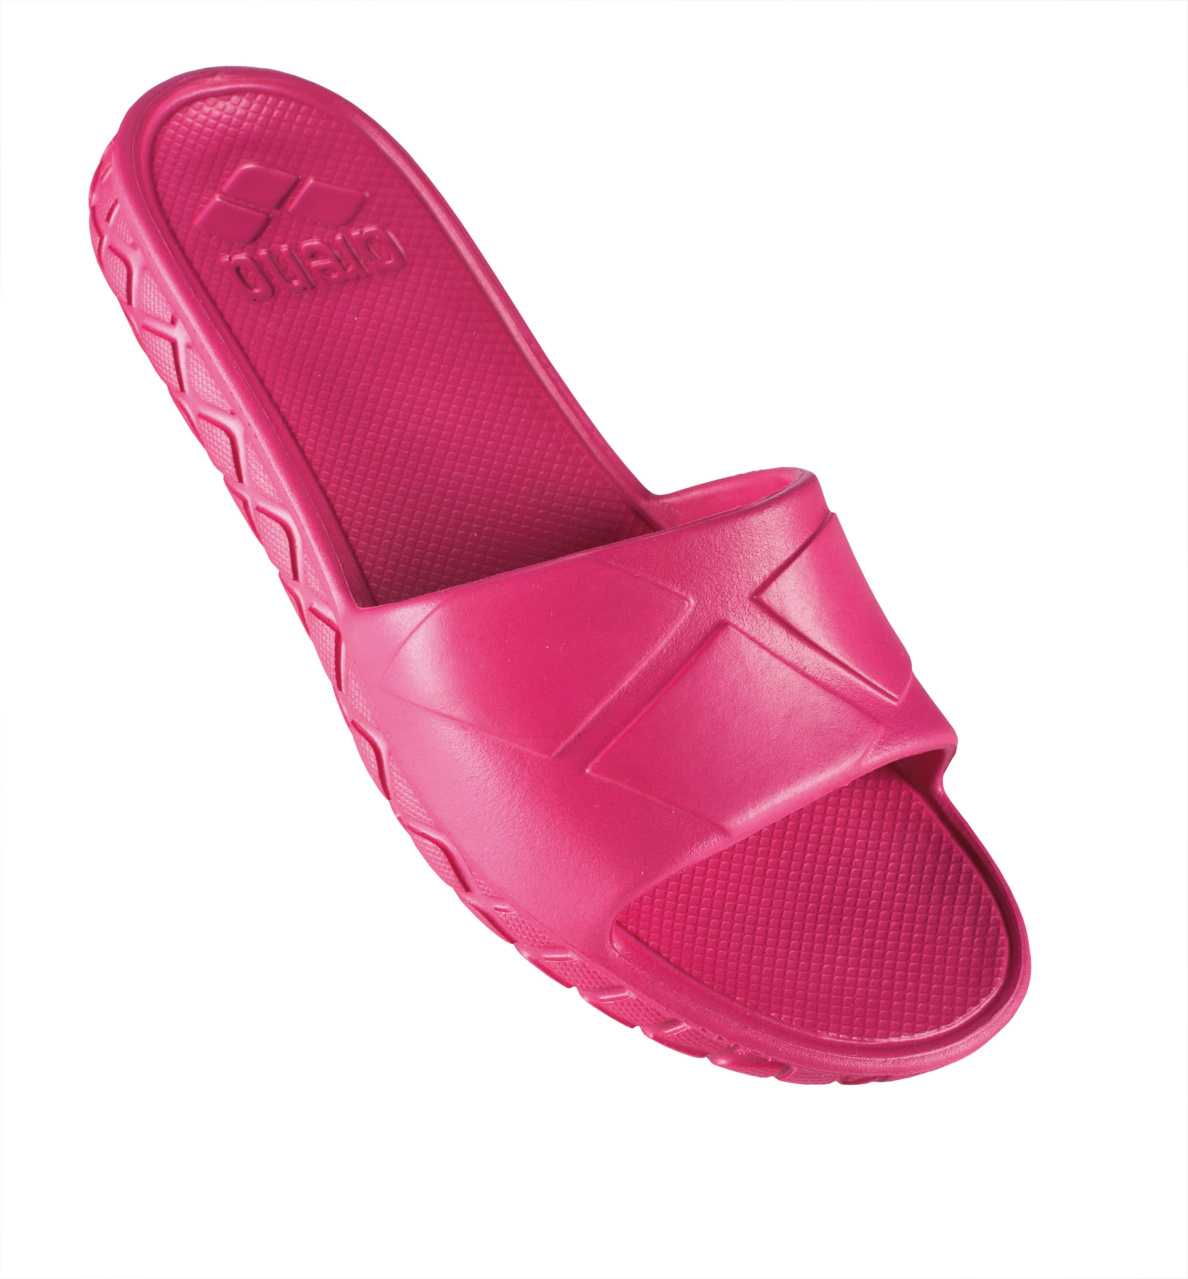 Children’s pool shoes